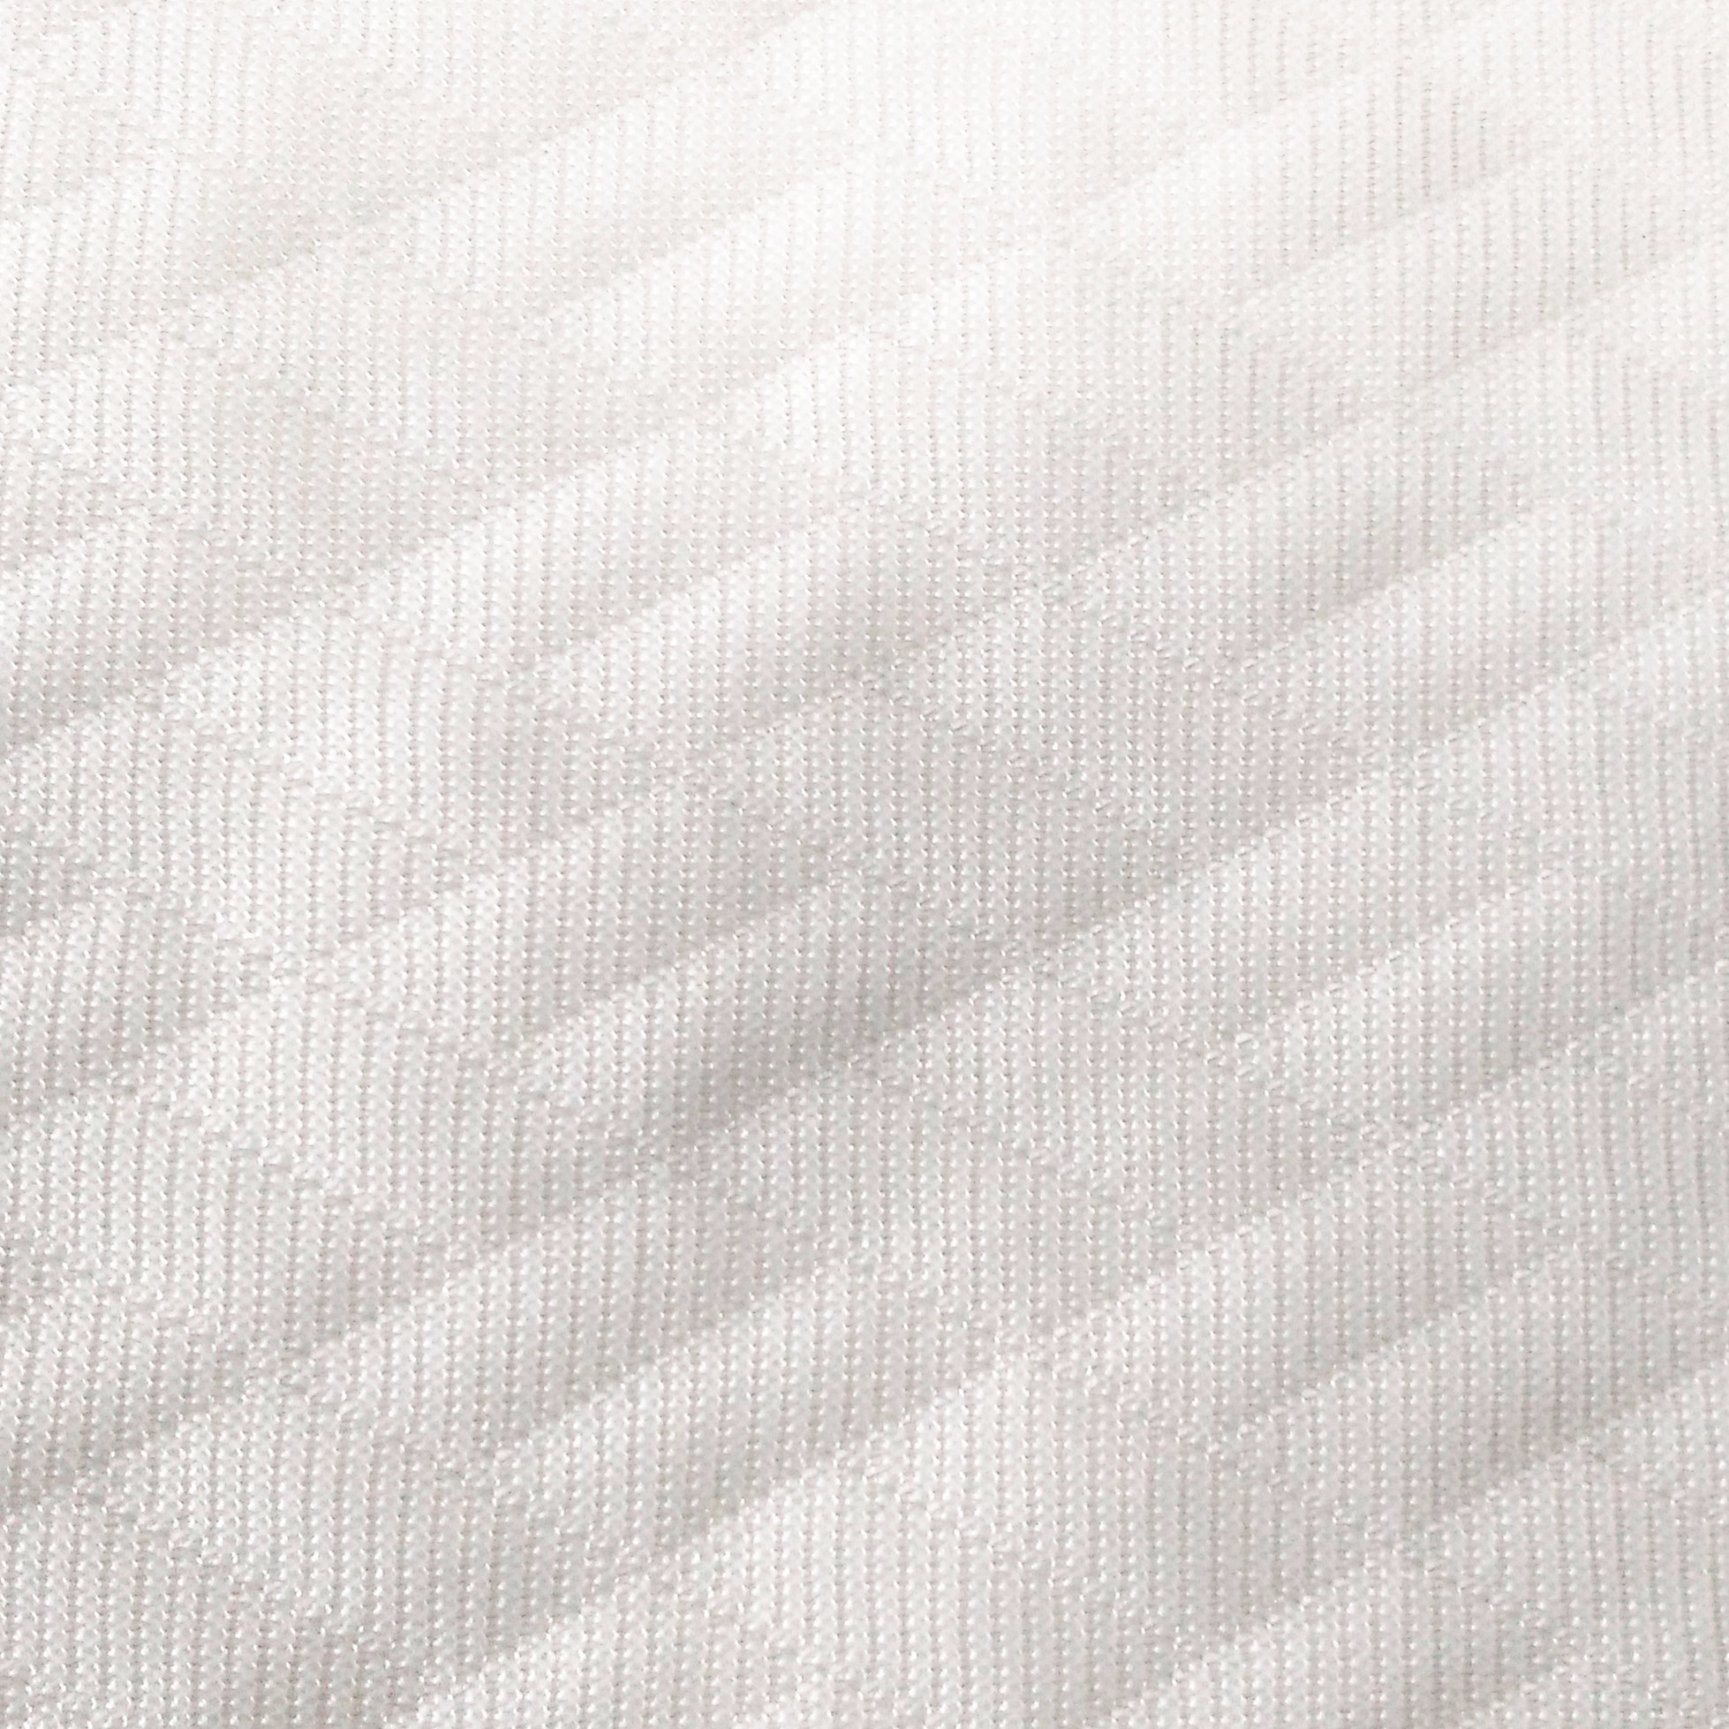 Knitted 100% Polyester Mattress Ticking Fabric